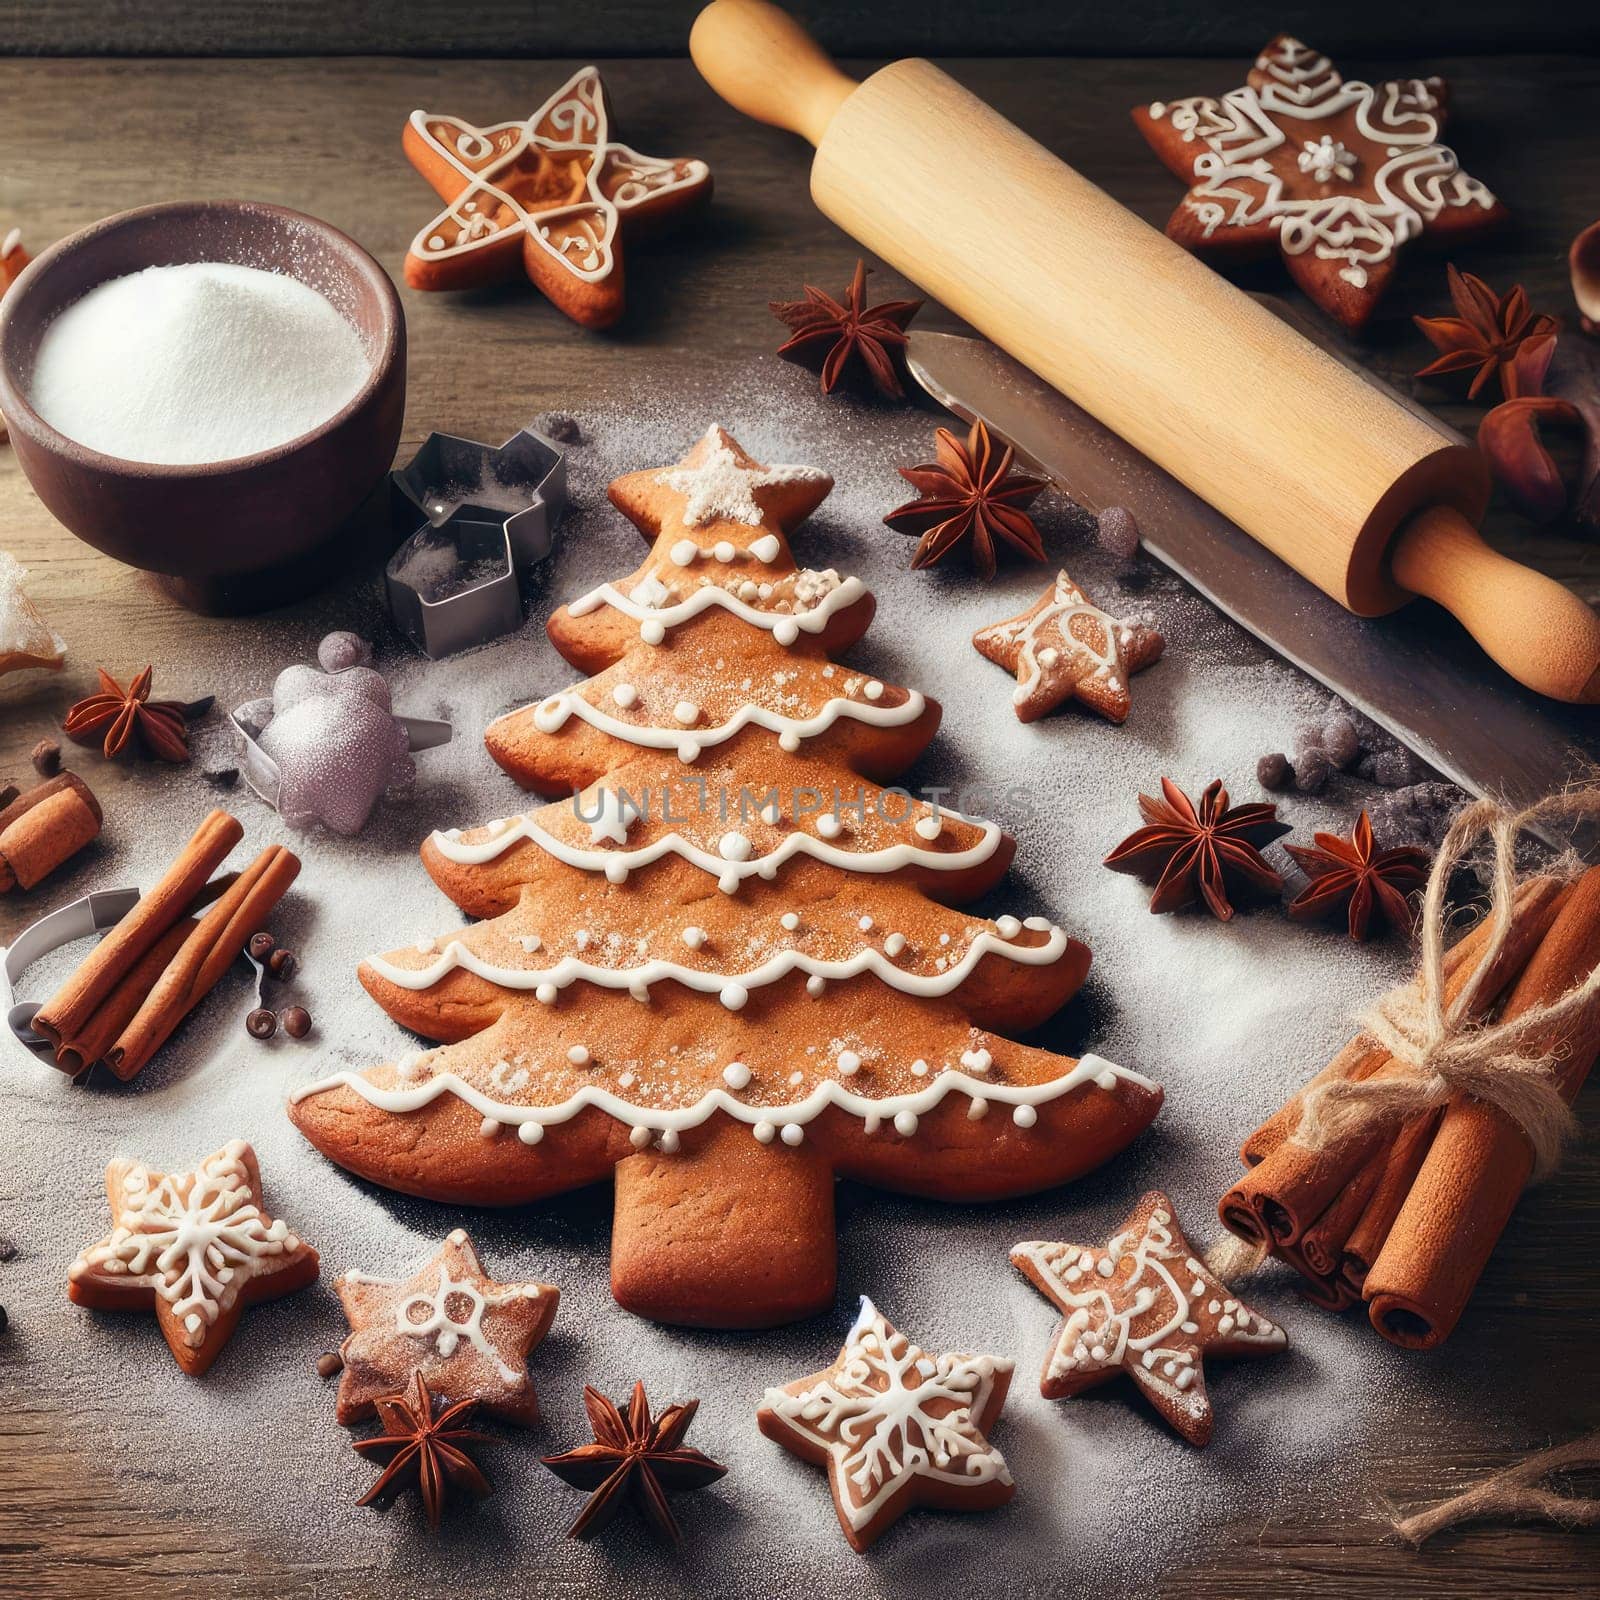 Festive Homemade Gingerbread Tree on Vintage Wooden Background with Spices and Decorations. Cozy Christmas Baking Scene in Macro View.